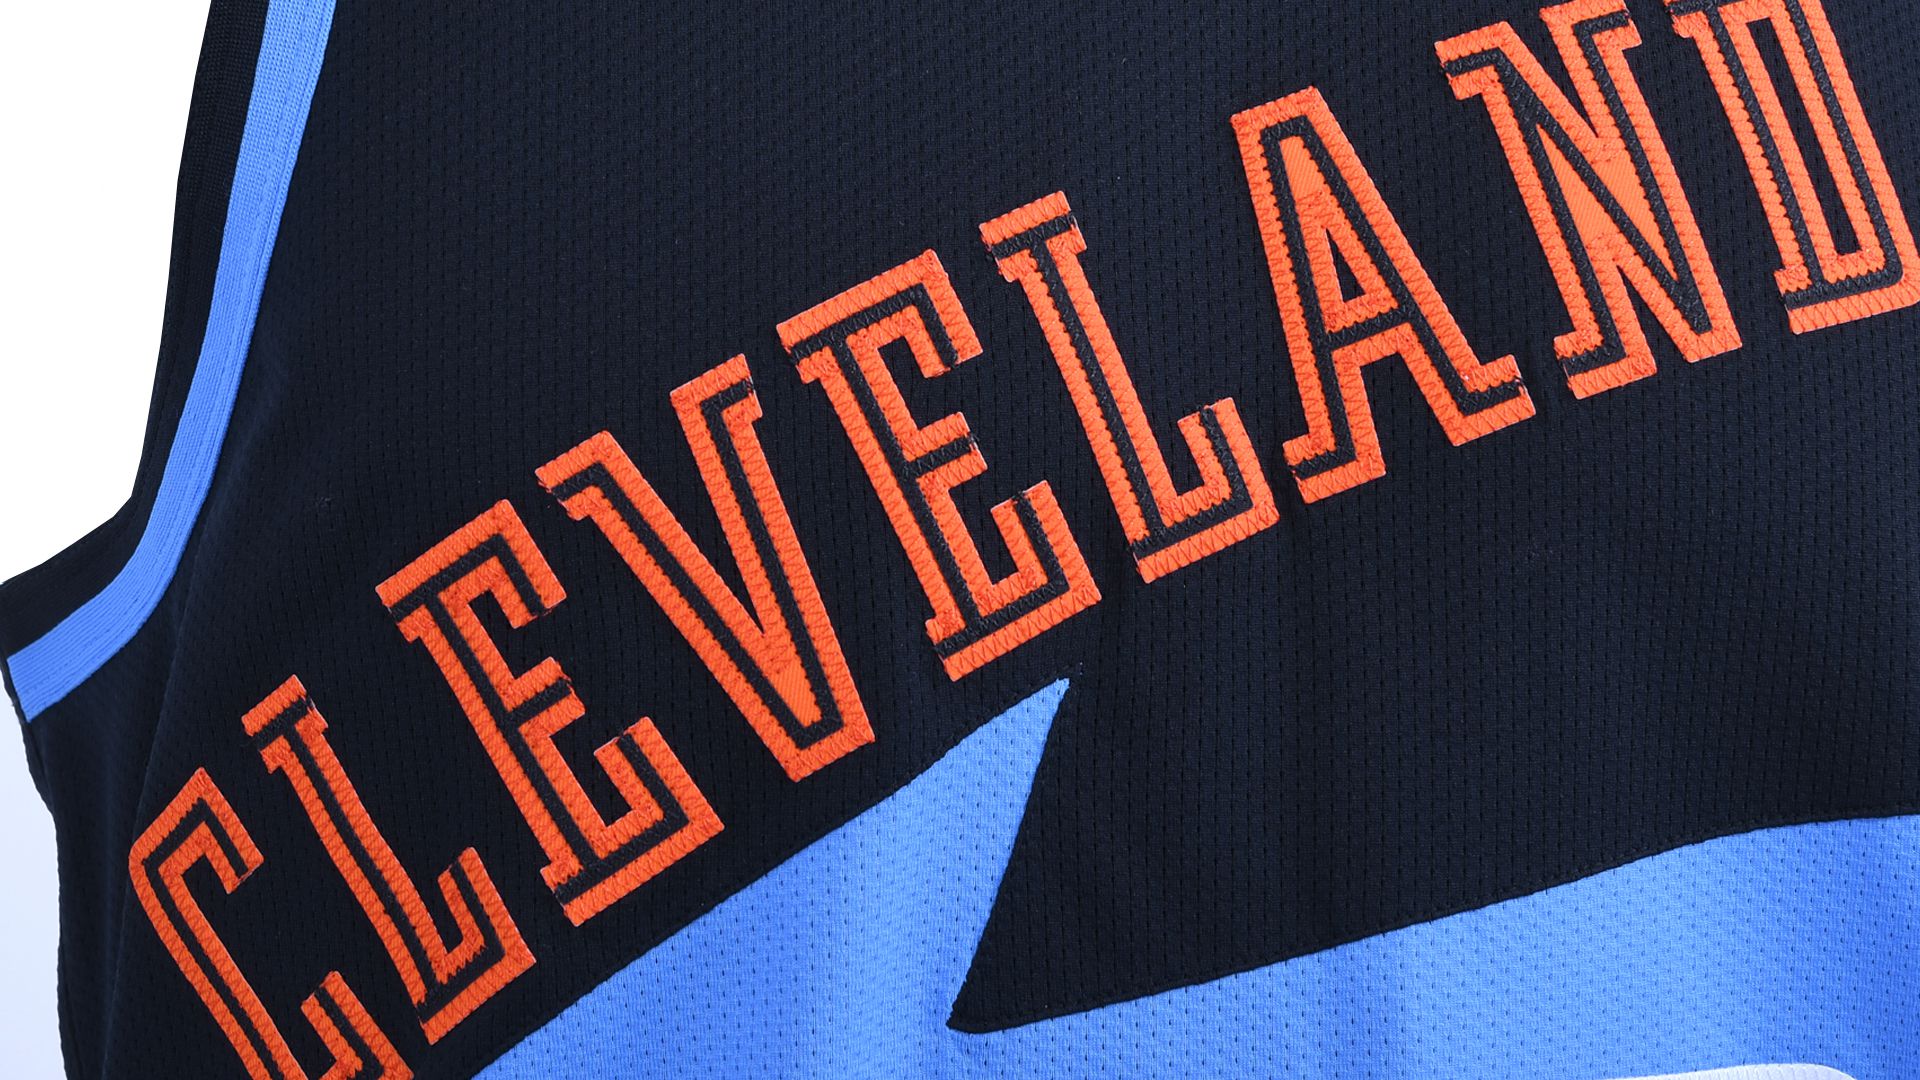 cleveland cavaliers jersey font